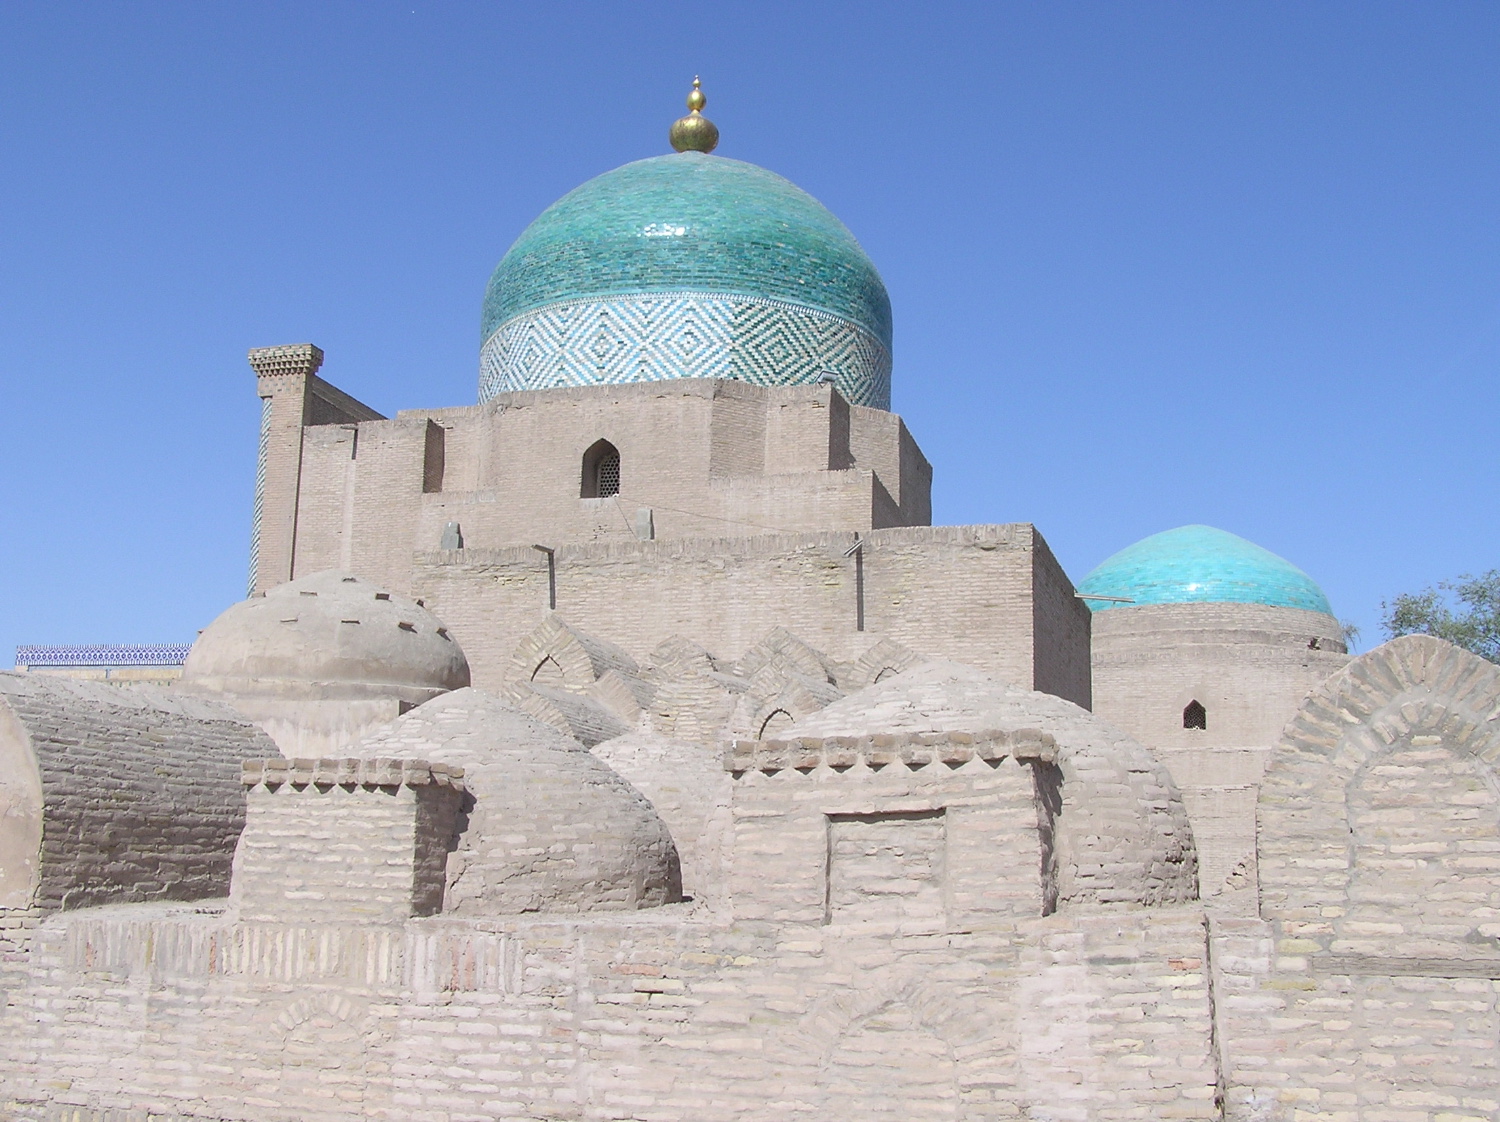 Side view of the khanagah with adjacent tombs in the foreground